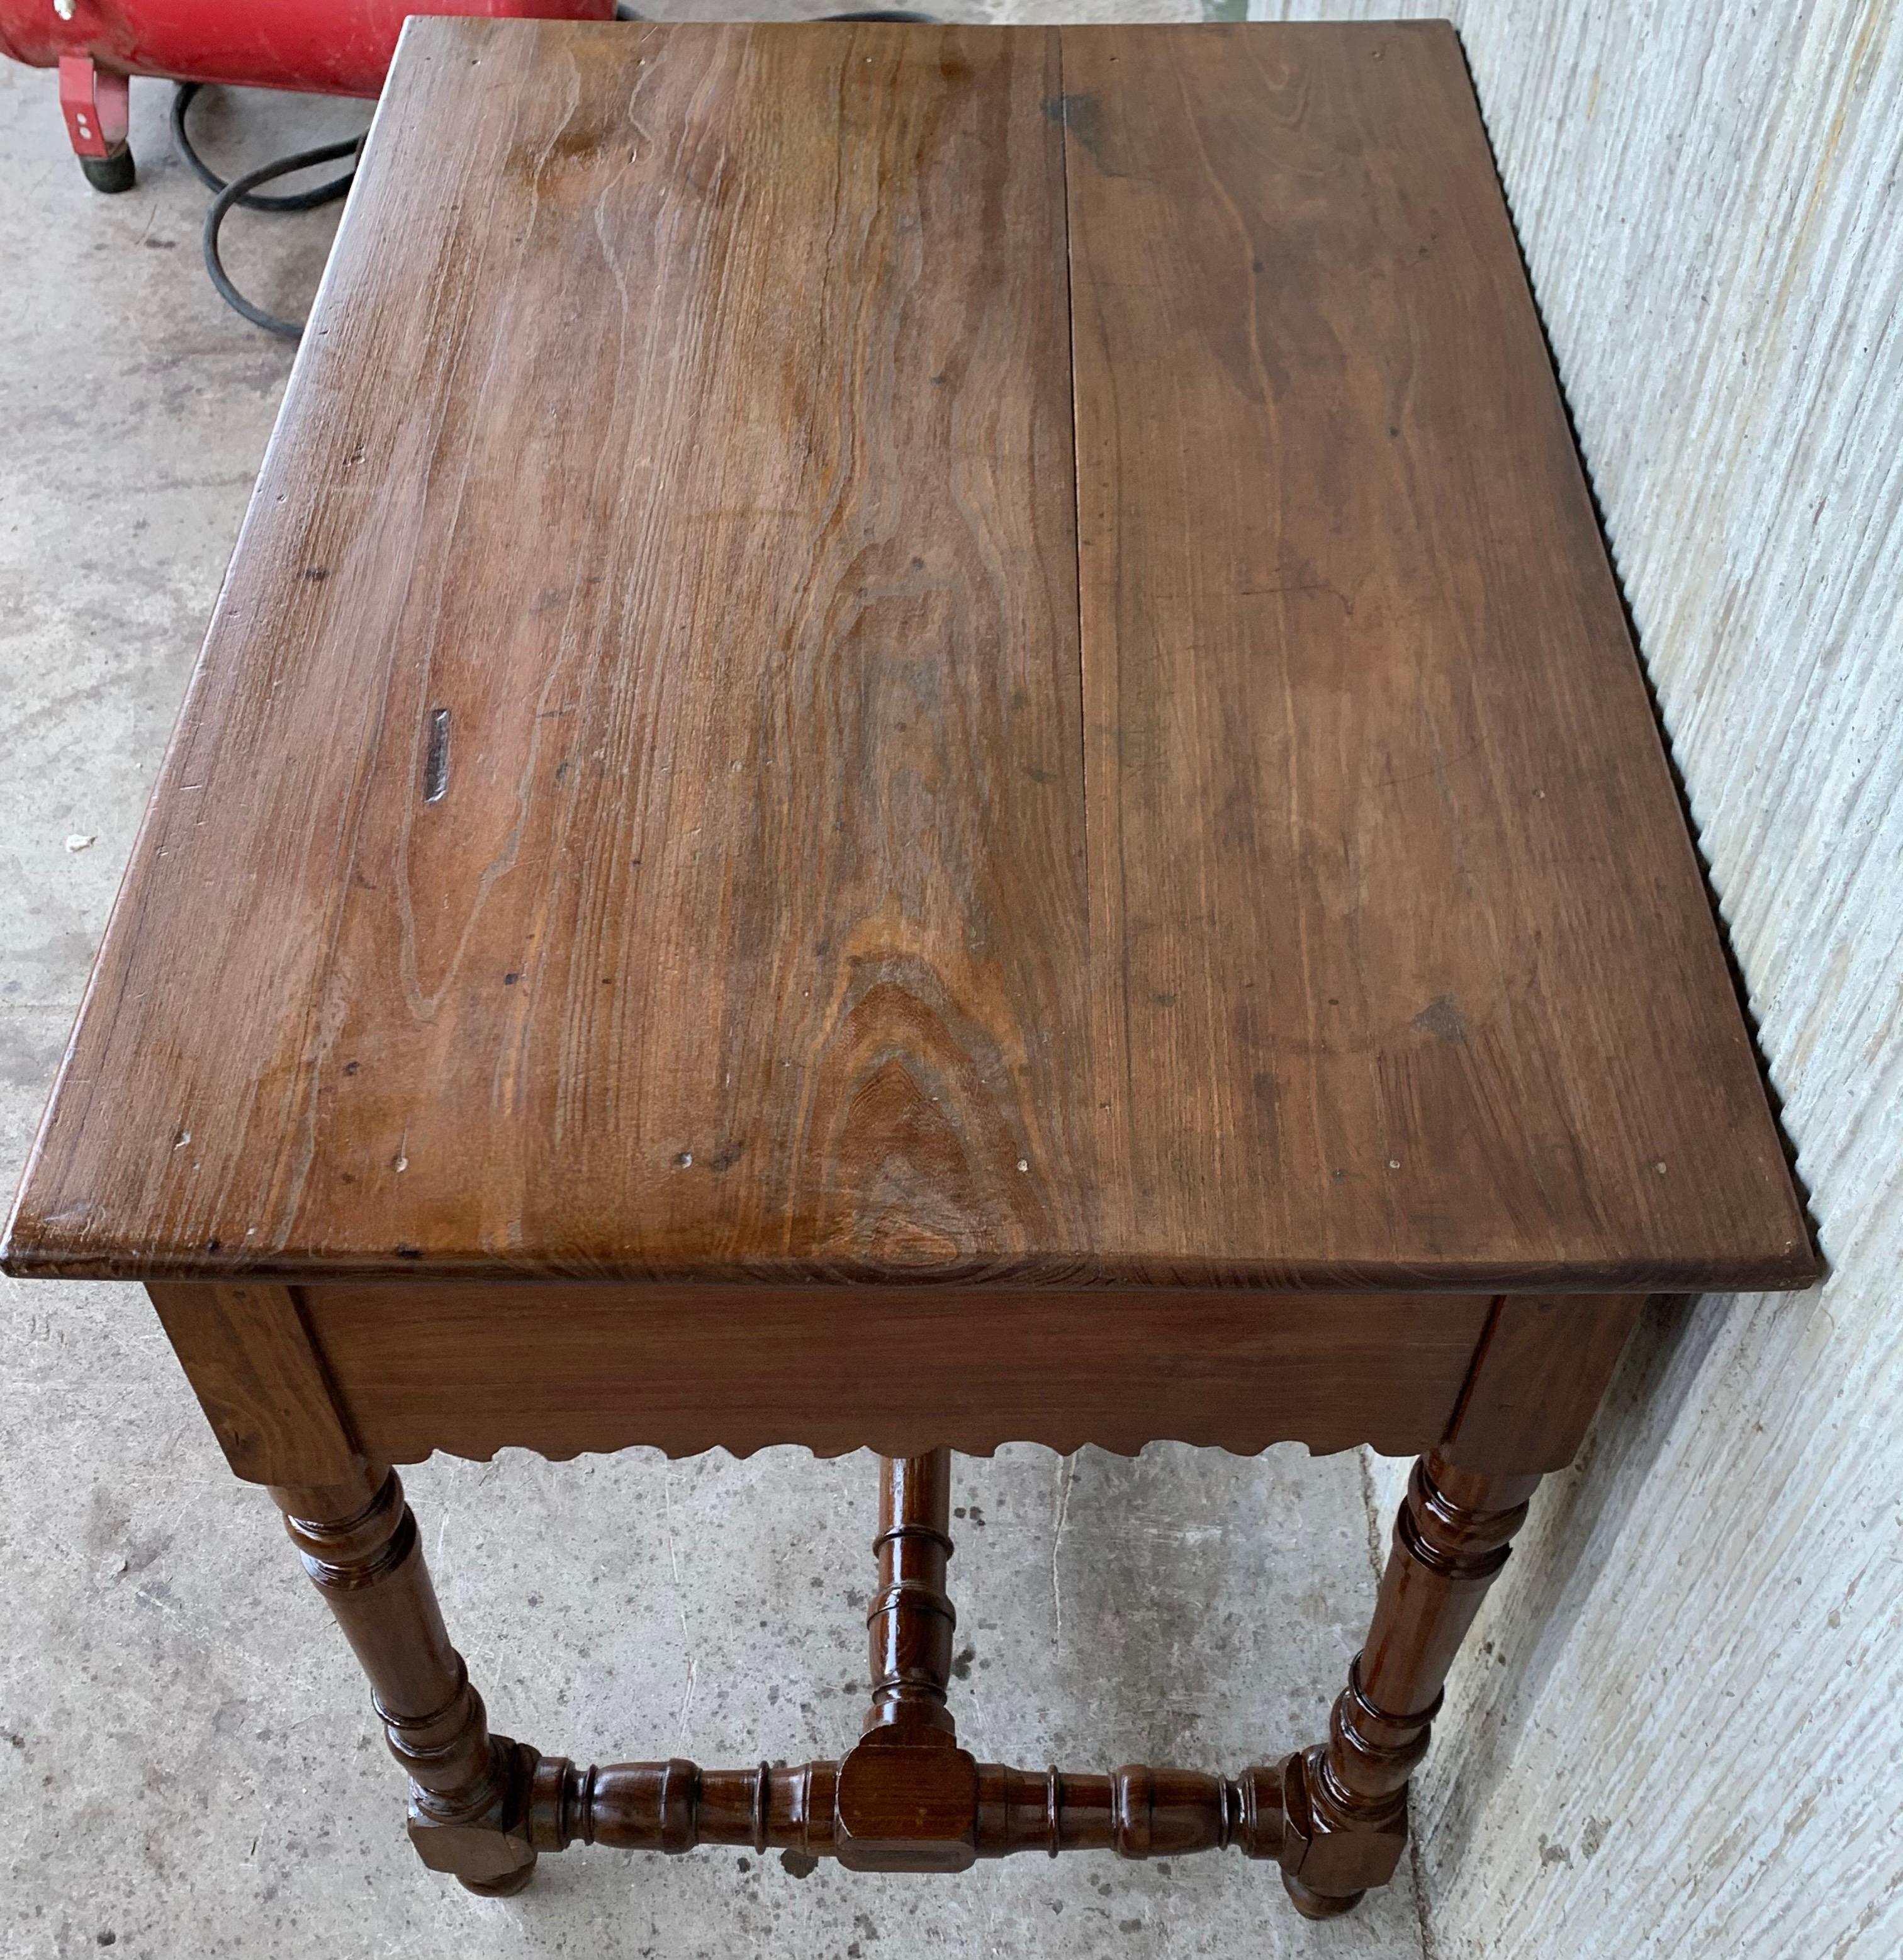 Pine Early 20th Spanish Mobila Country Farm Desk with, Side Table or Butcher Block For Sale